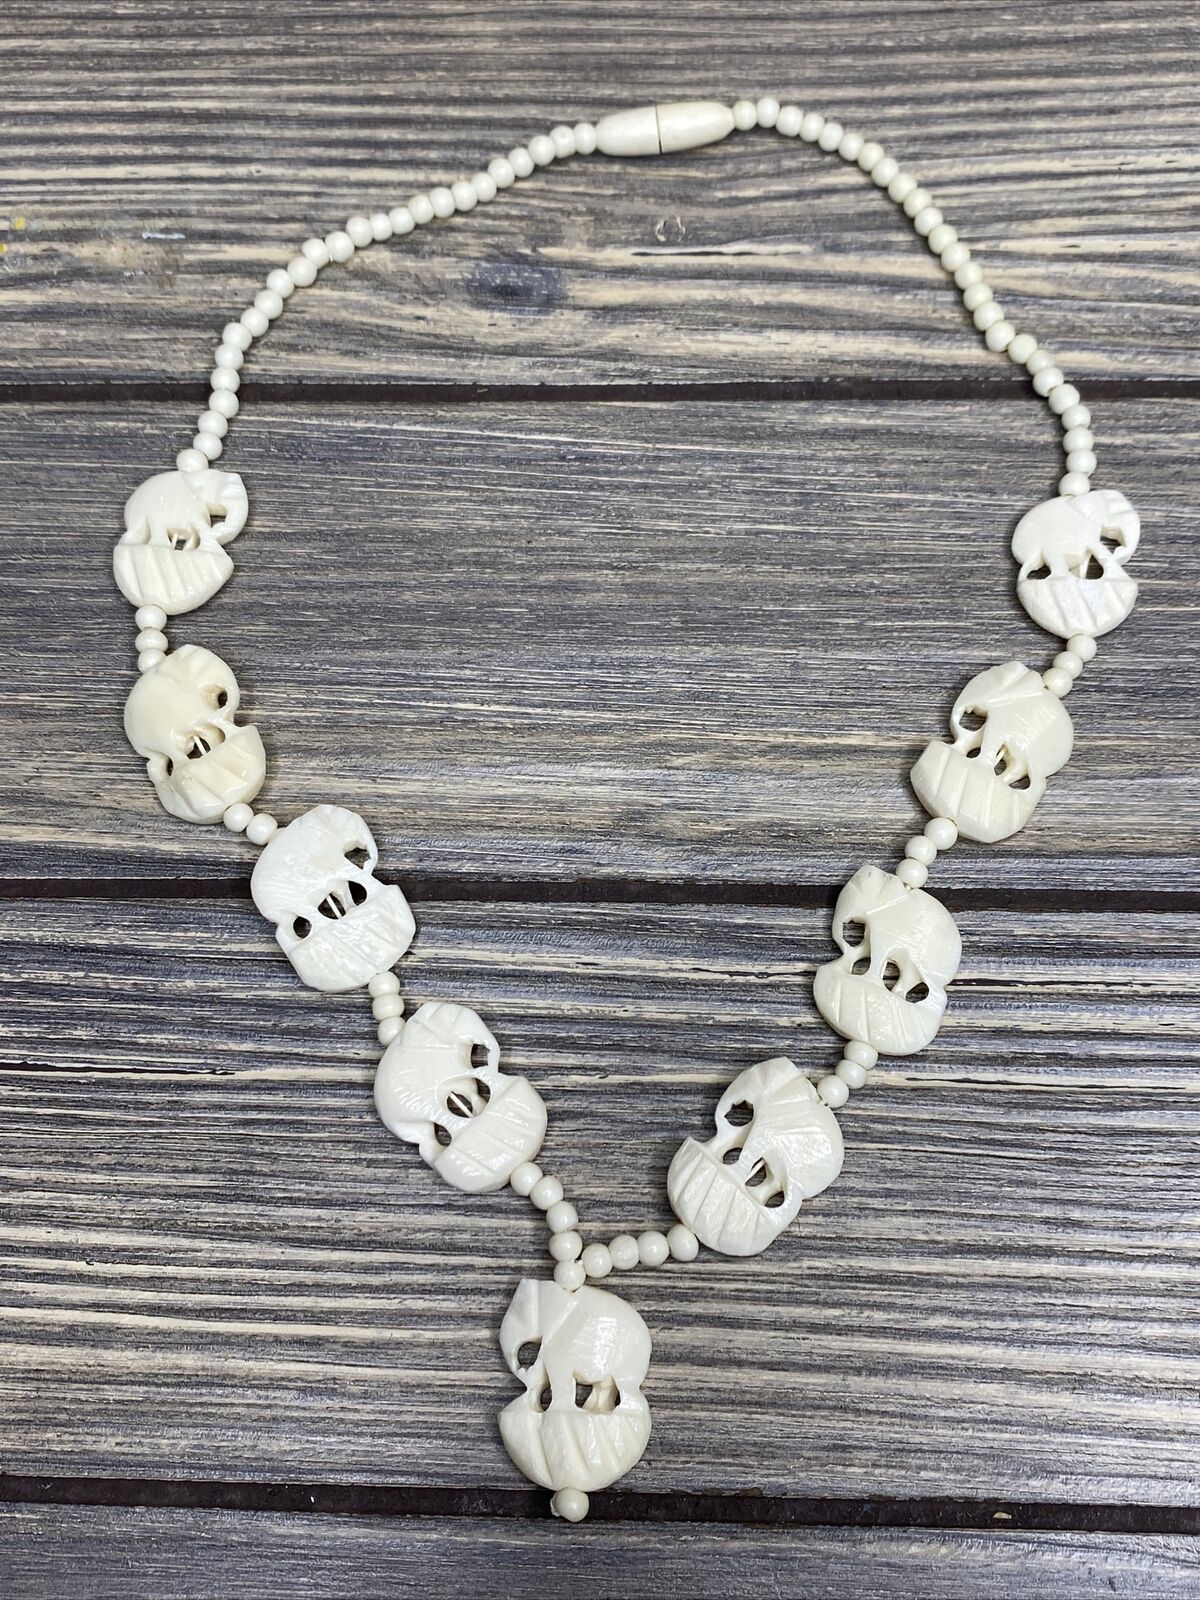 Vintage Jewelry Faux Carved White Elephant Necklace Choker